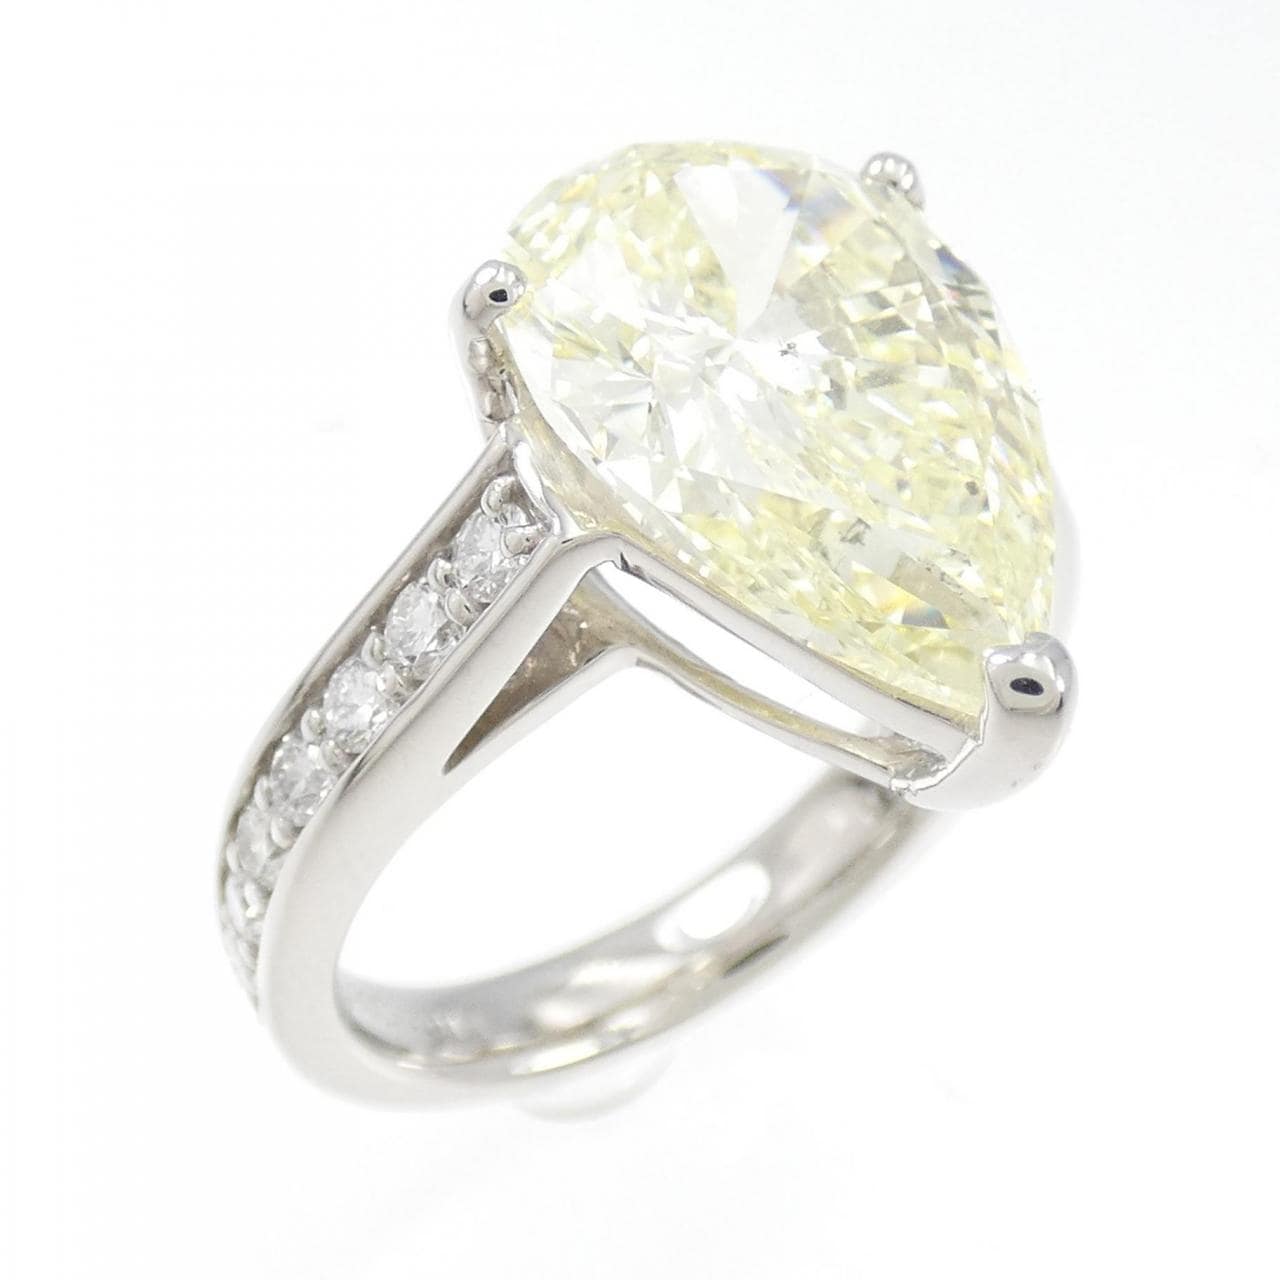 [Remake] PT Diamond Ring 5.015CT LY SI2 Pear Shape